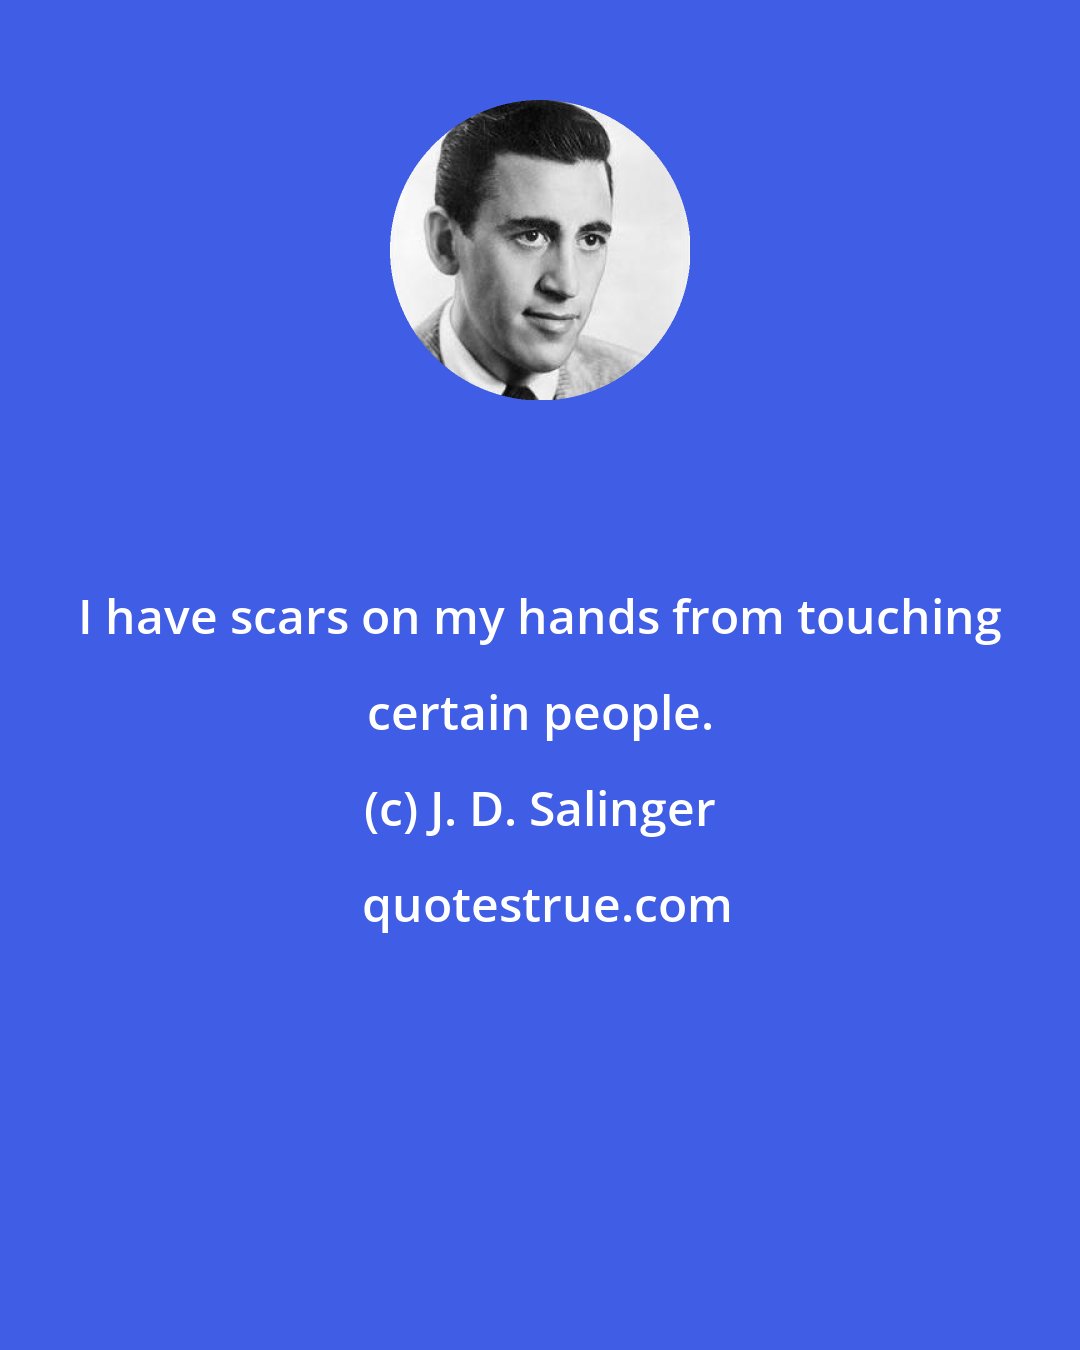 J. D. Salinger: I have scars on my hands from touching certain people.